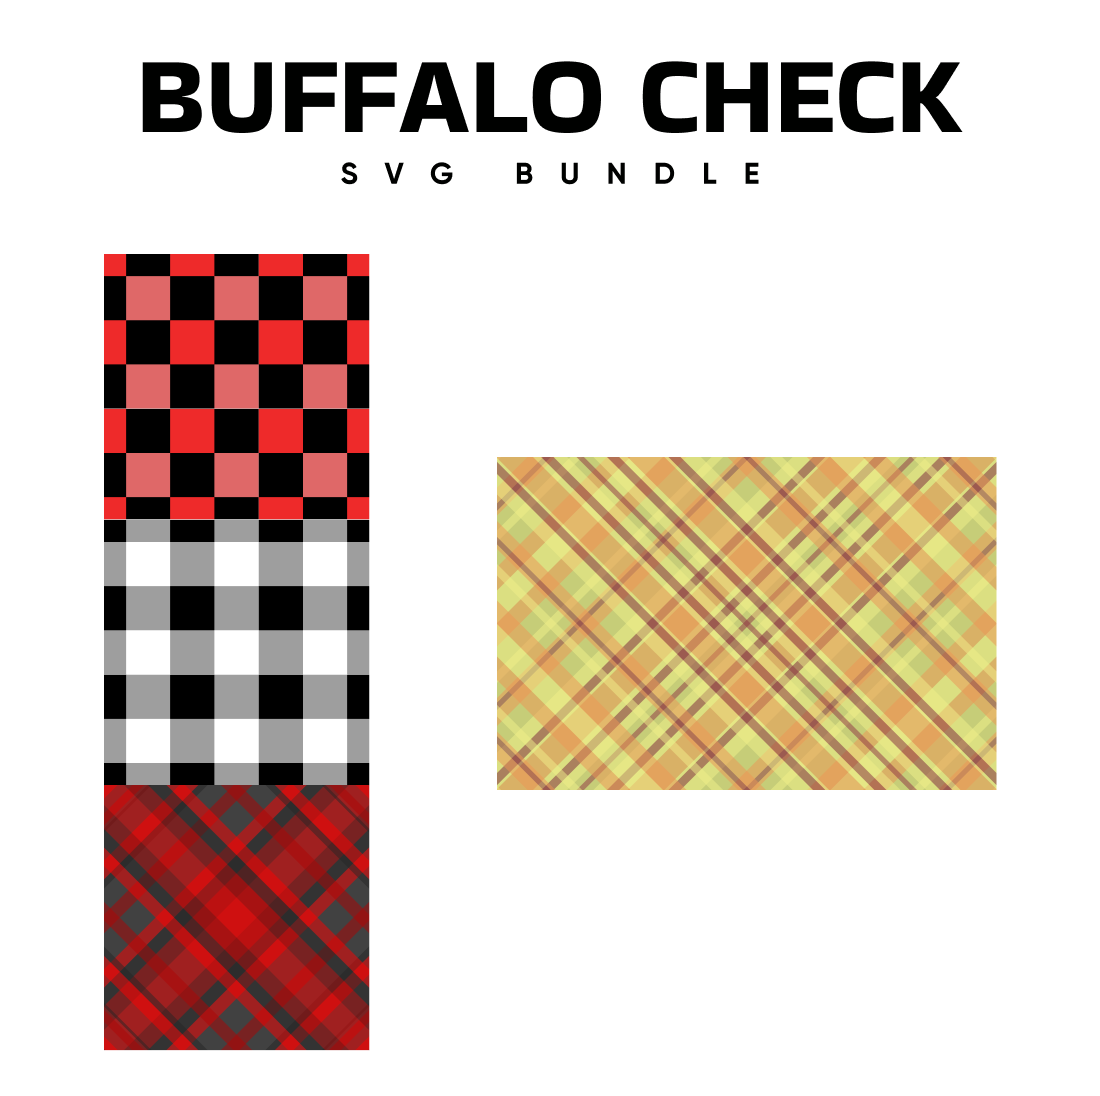 The buffalo check pattern is shown in red.